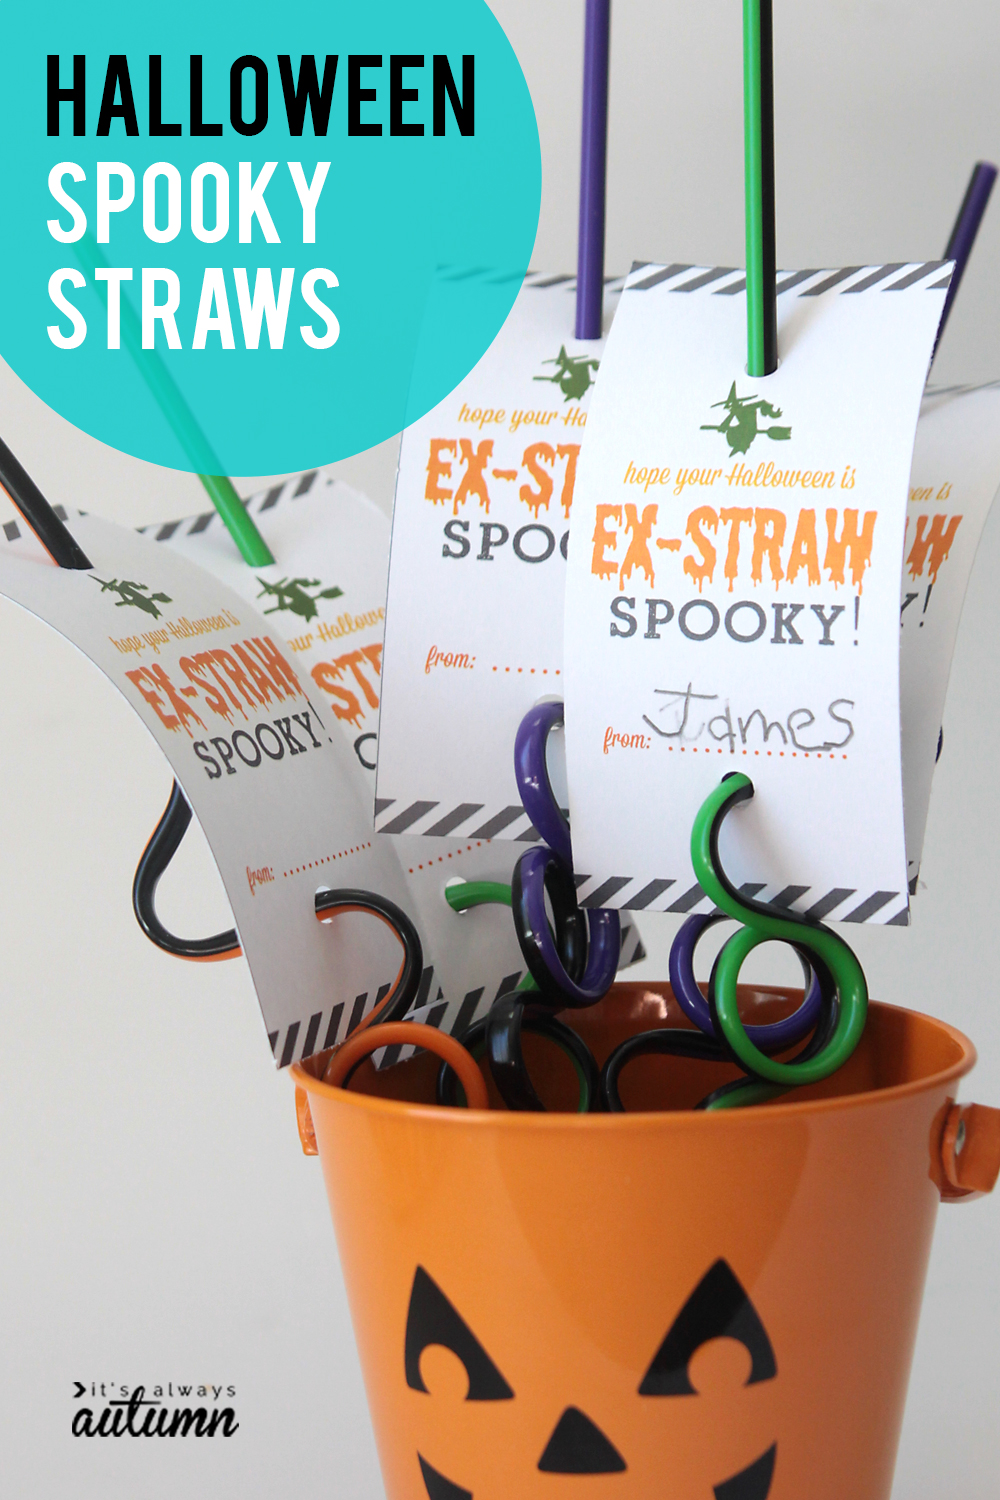 Spooky Halloween straws! Great non-candy Halloween treat or gift idea.